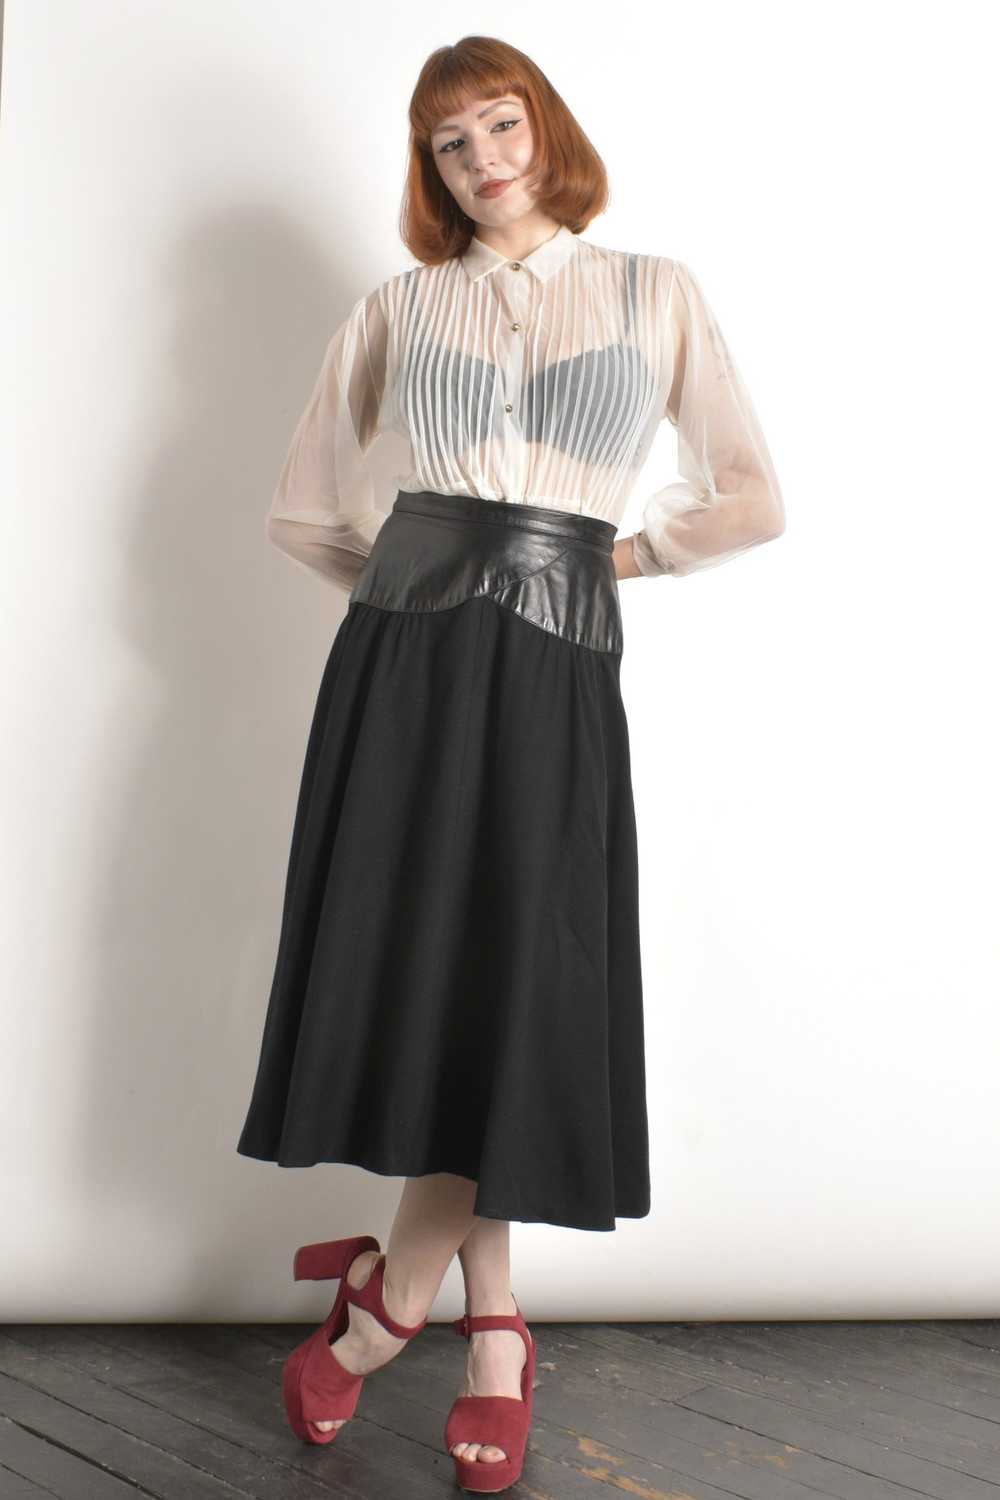 1980s Wool and Leather Skirt-small - image 3